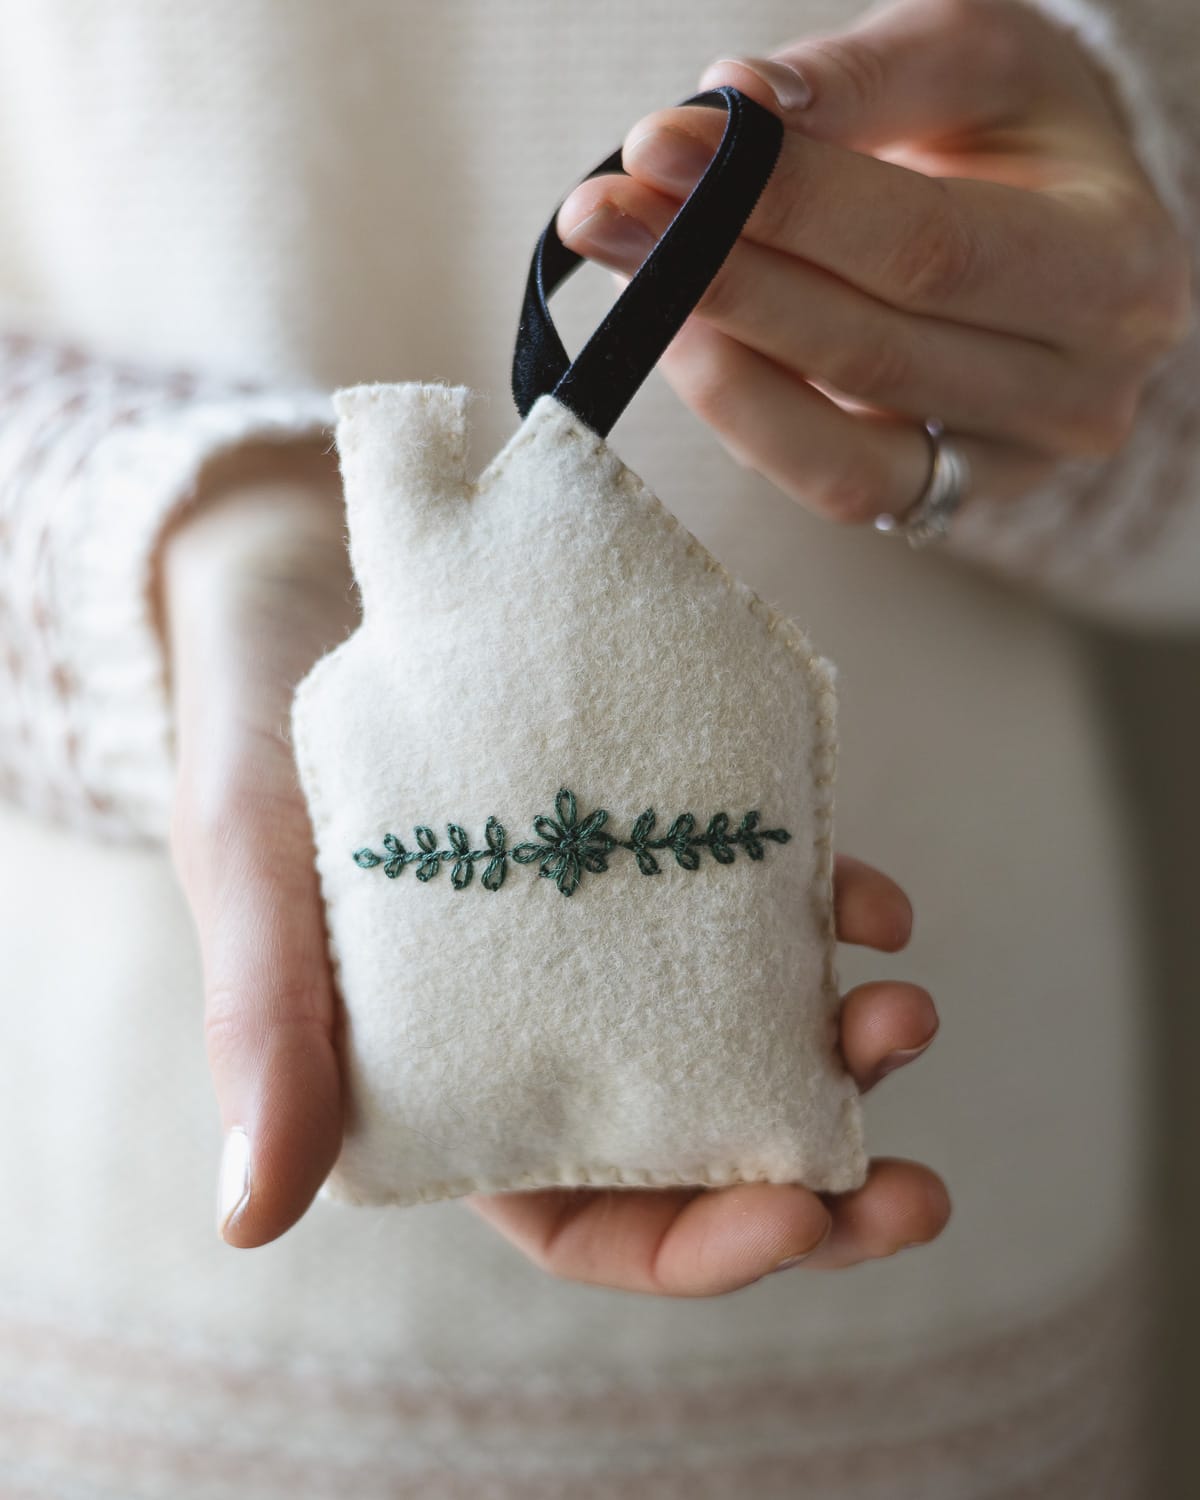 A woman holding a white felt house ornament with green embroidery.